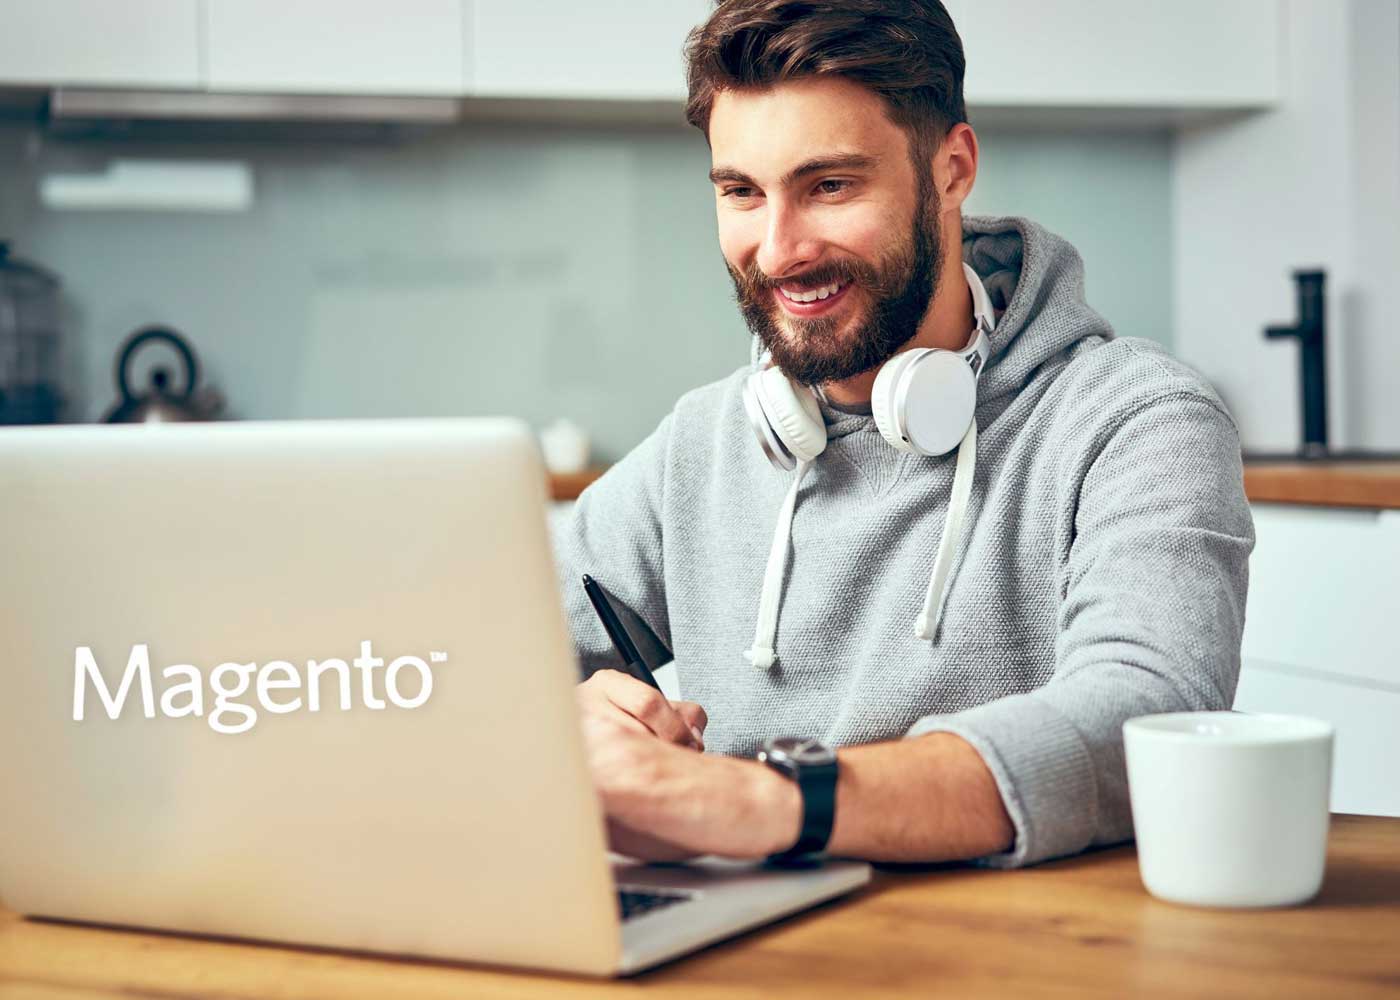 How to Hire the Best Magento Developers from India?